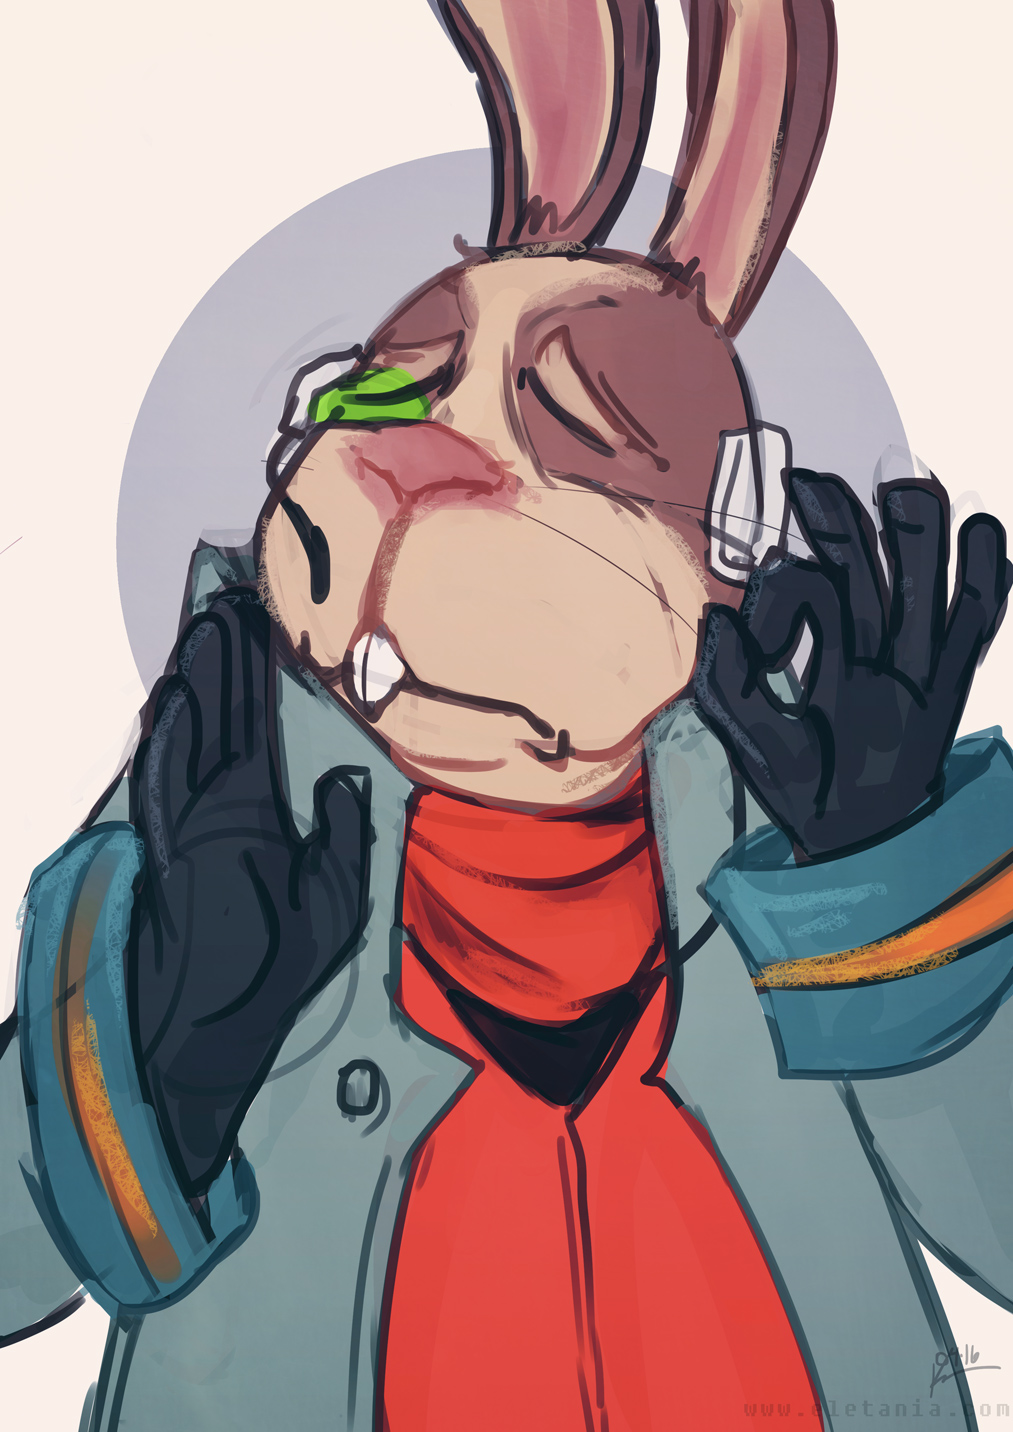 When he pulls off the Barrel Roll just right